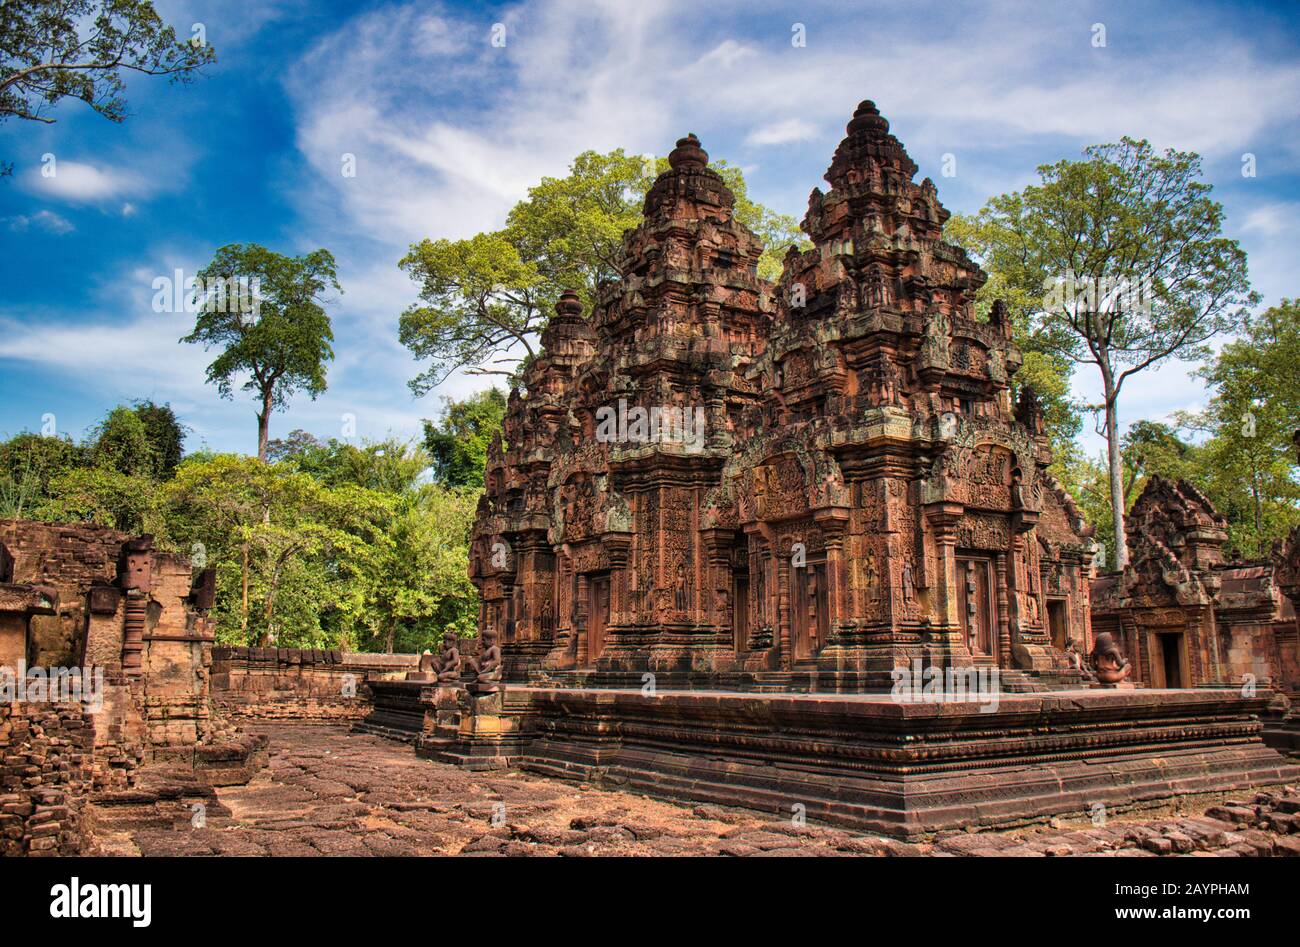 Banteay Srei or Banteay Srey Temple site among the ancient ruins of Angkor Wat Hindu temple complex in Siem Reap, Cambodia. The Temple is dedicated to Stock Photo